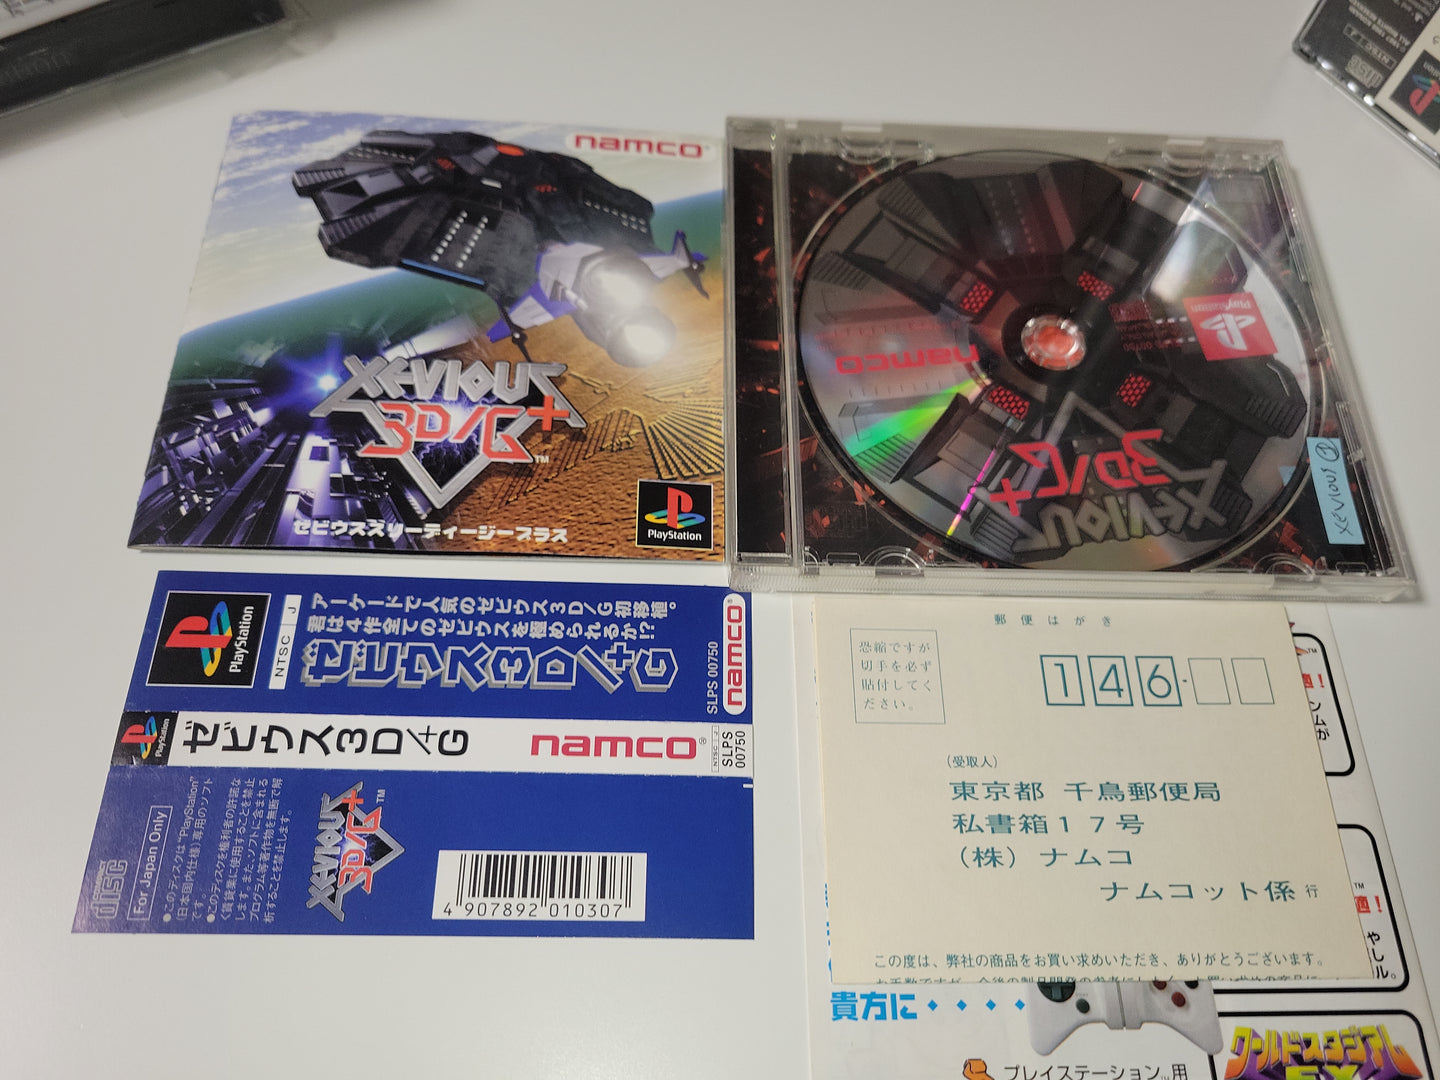 Xevious 3D/G - Sony PS1 Playstation